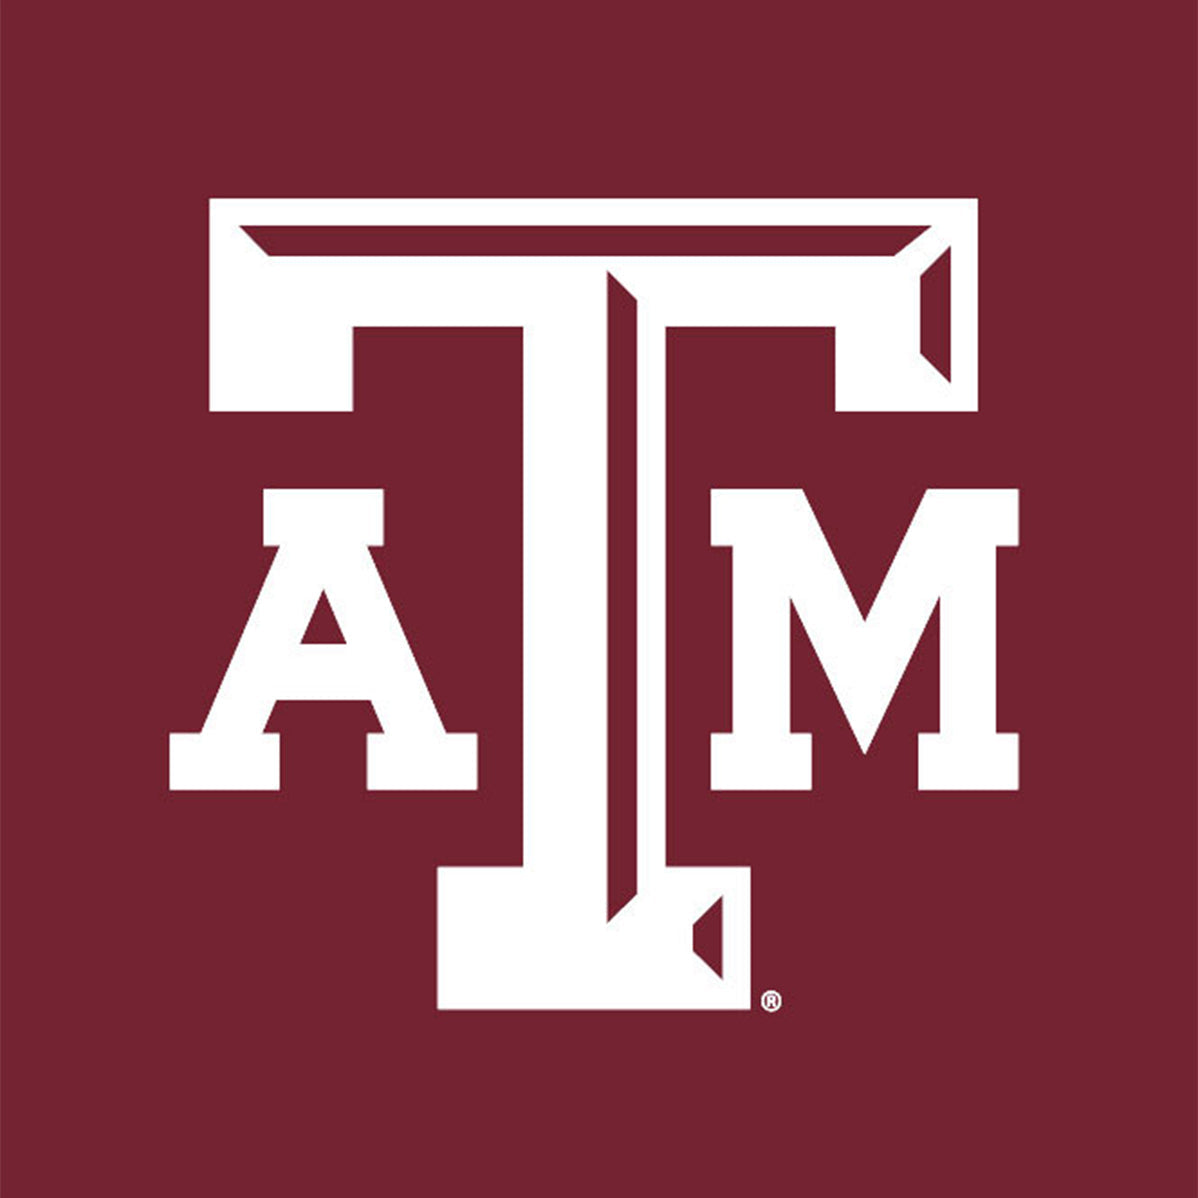 Texas A&M Large Decal